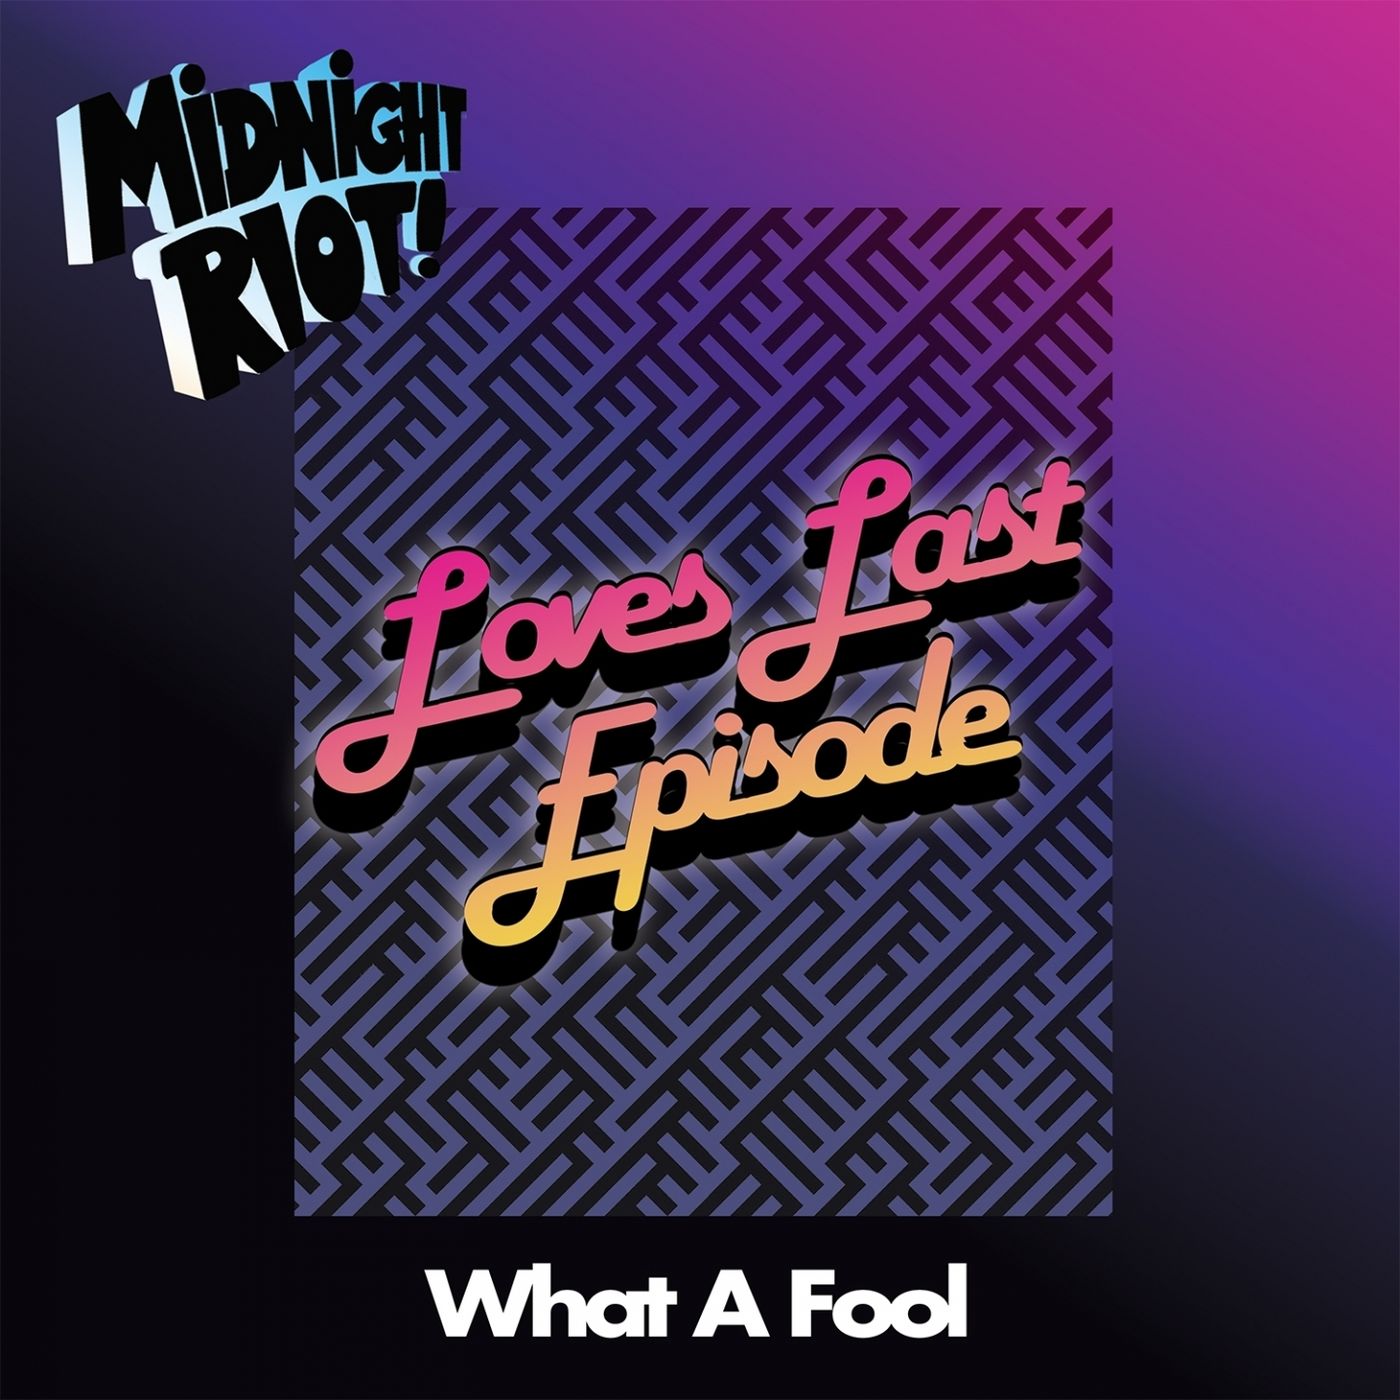 Loves Last Episode - What a Fool / Midnight Riot